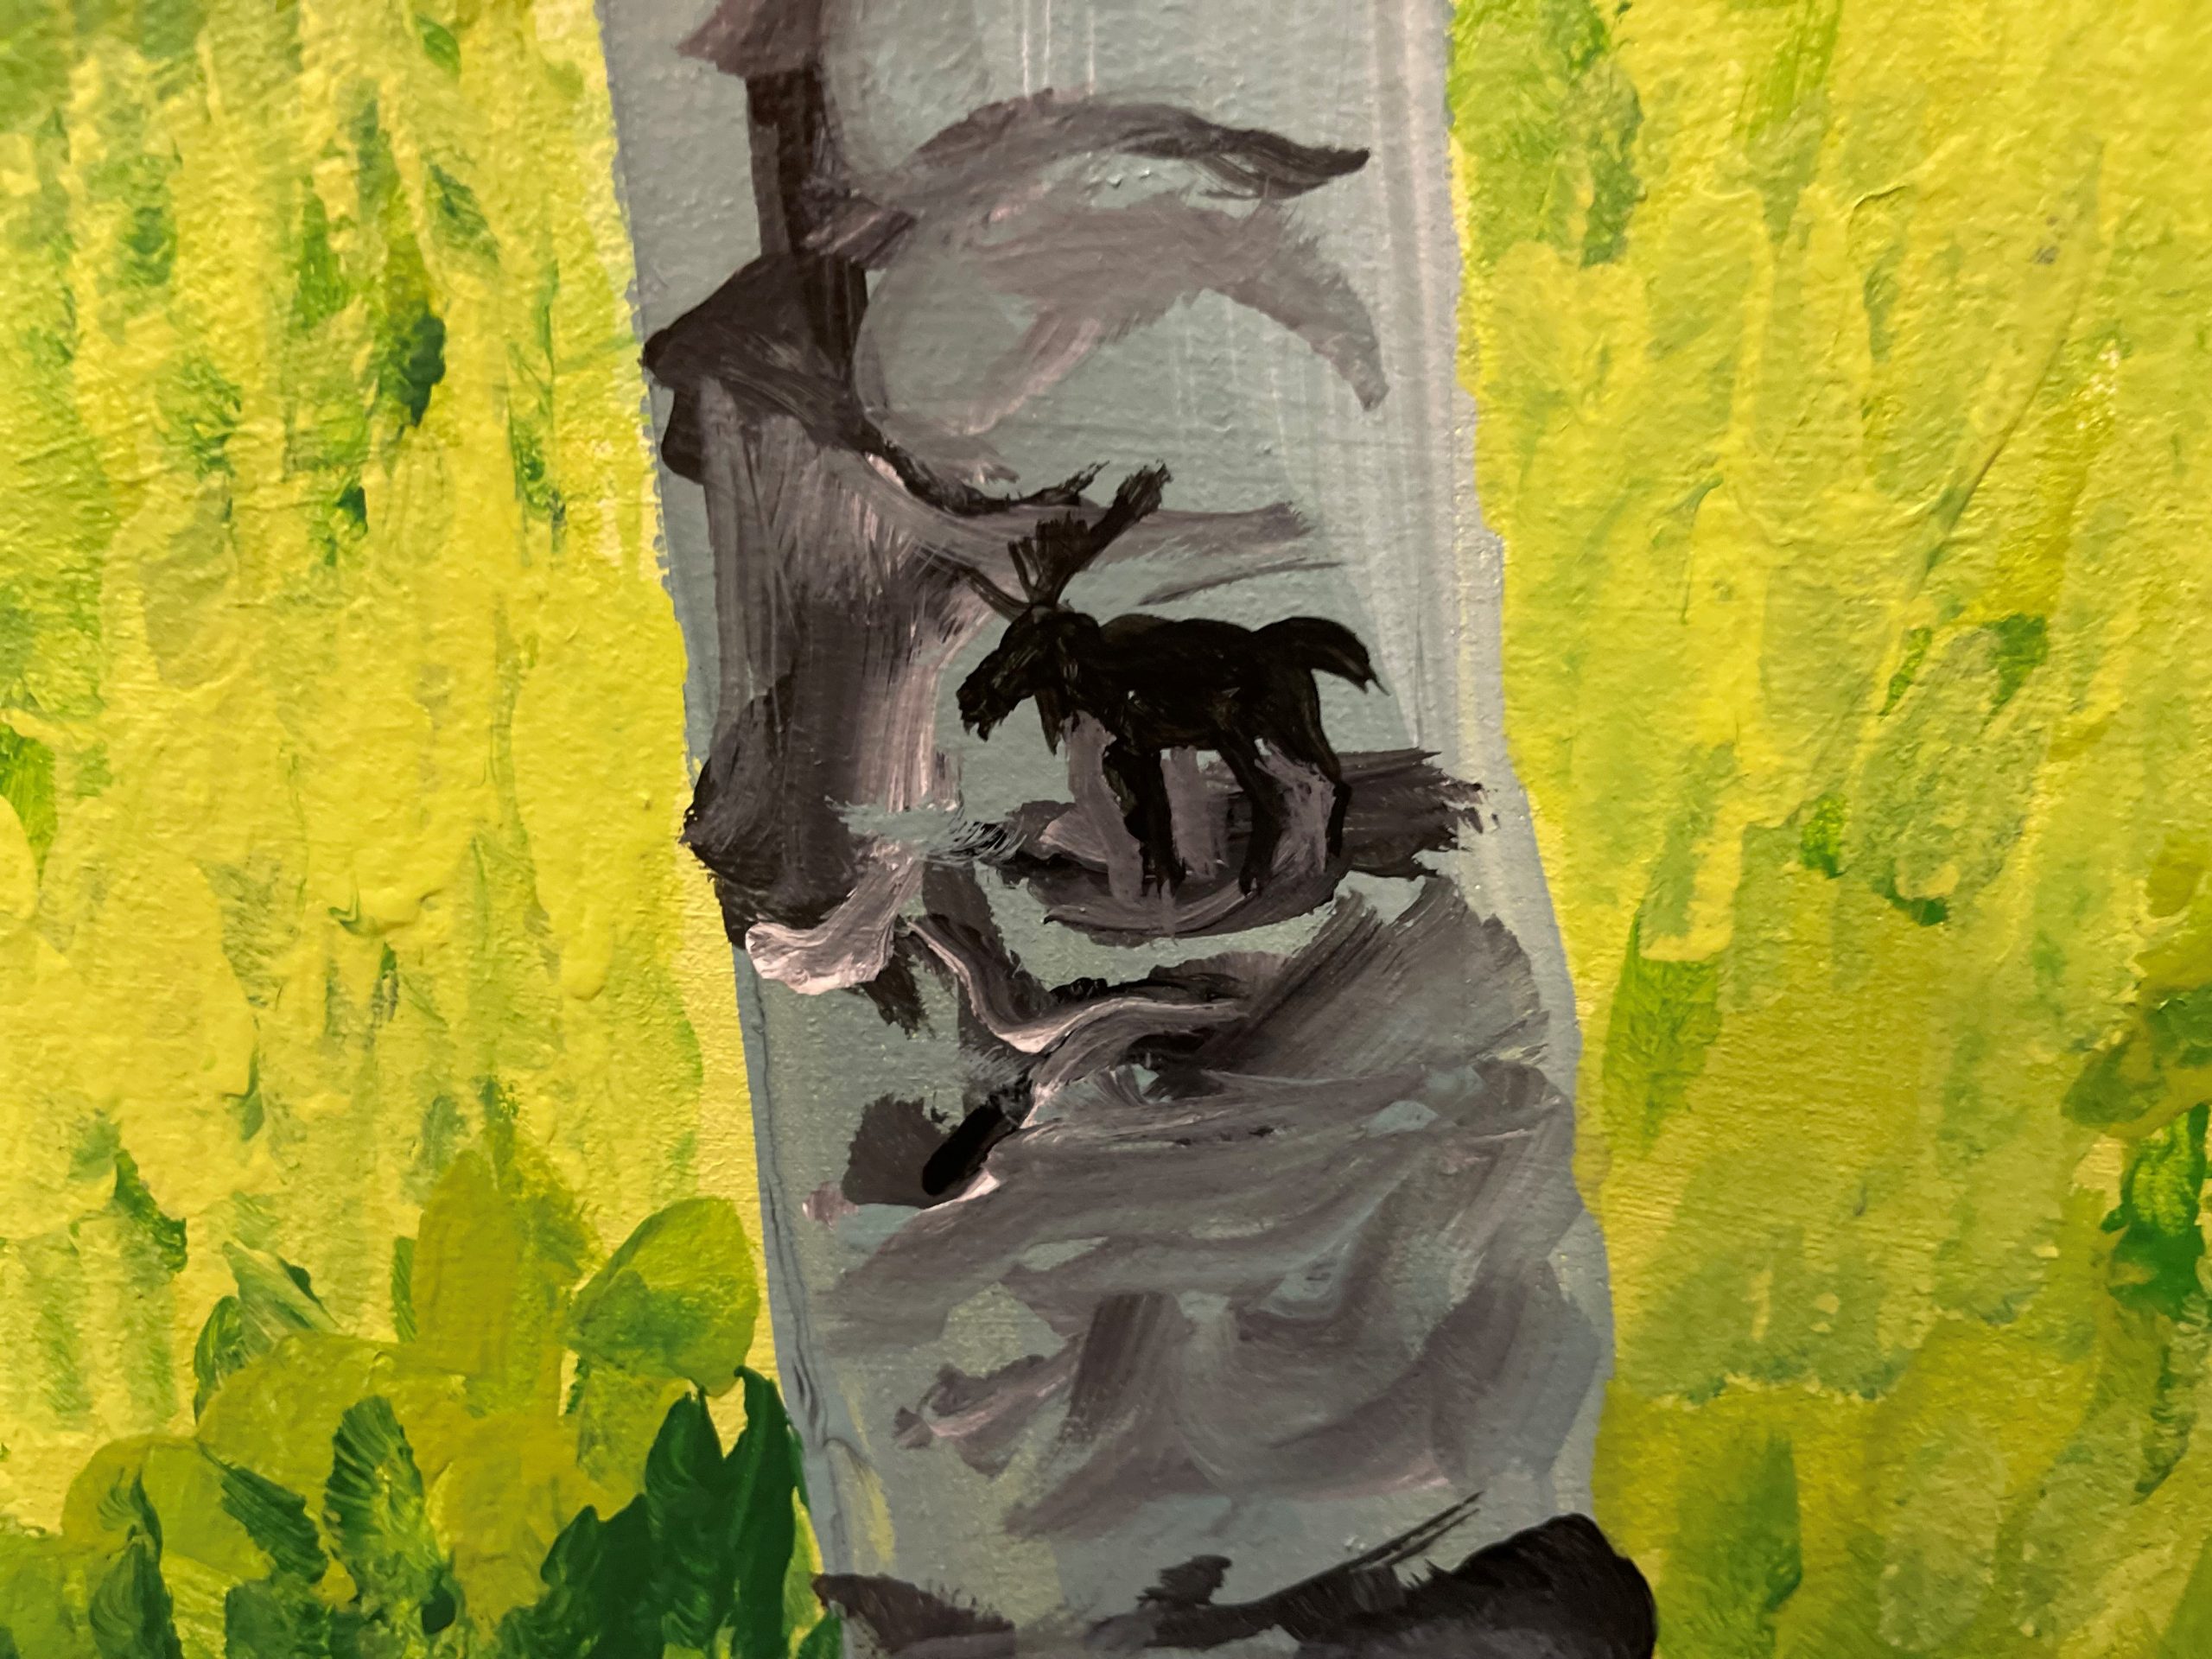 A painting depicts a grey tree trunk with a black silhouette of a moose against a yellow and green leafy background.